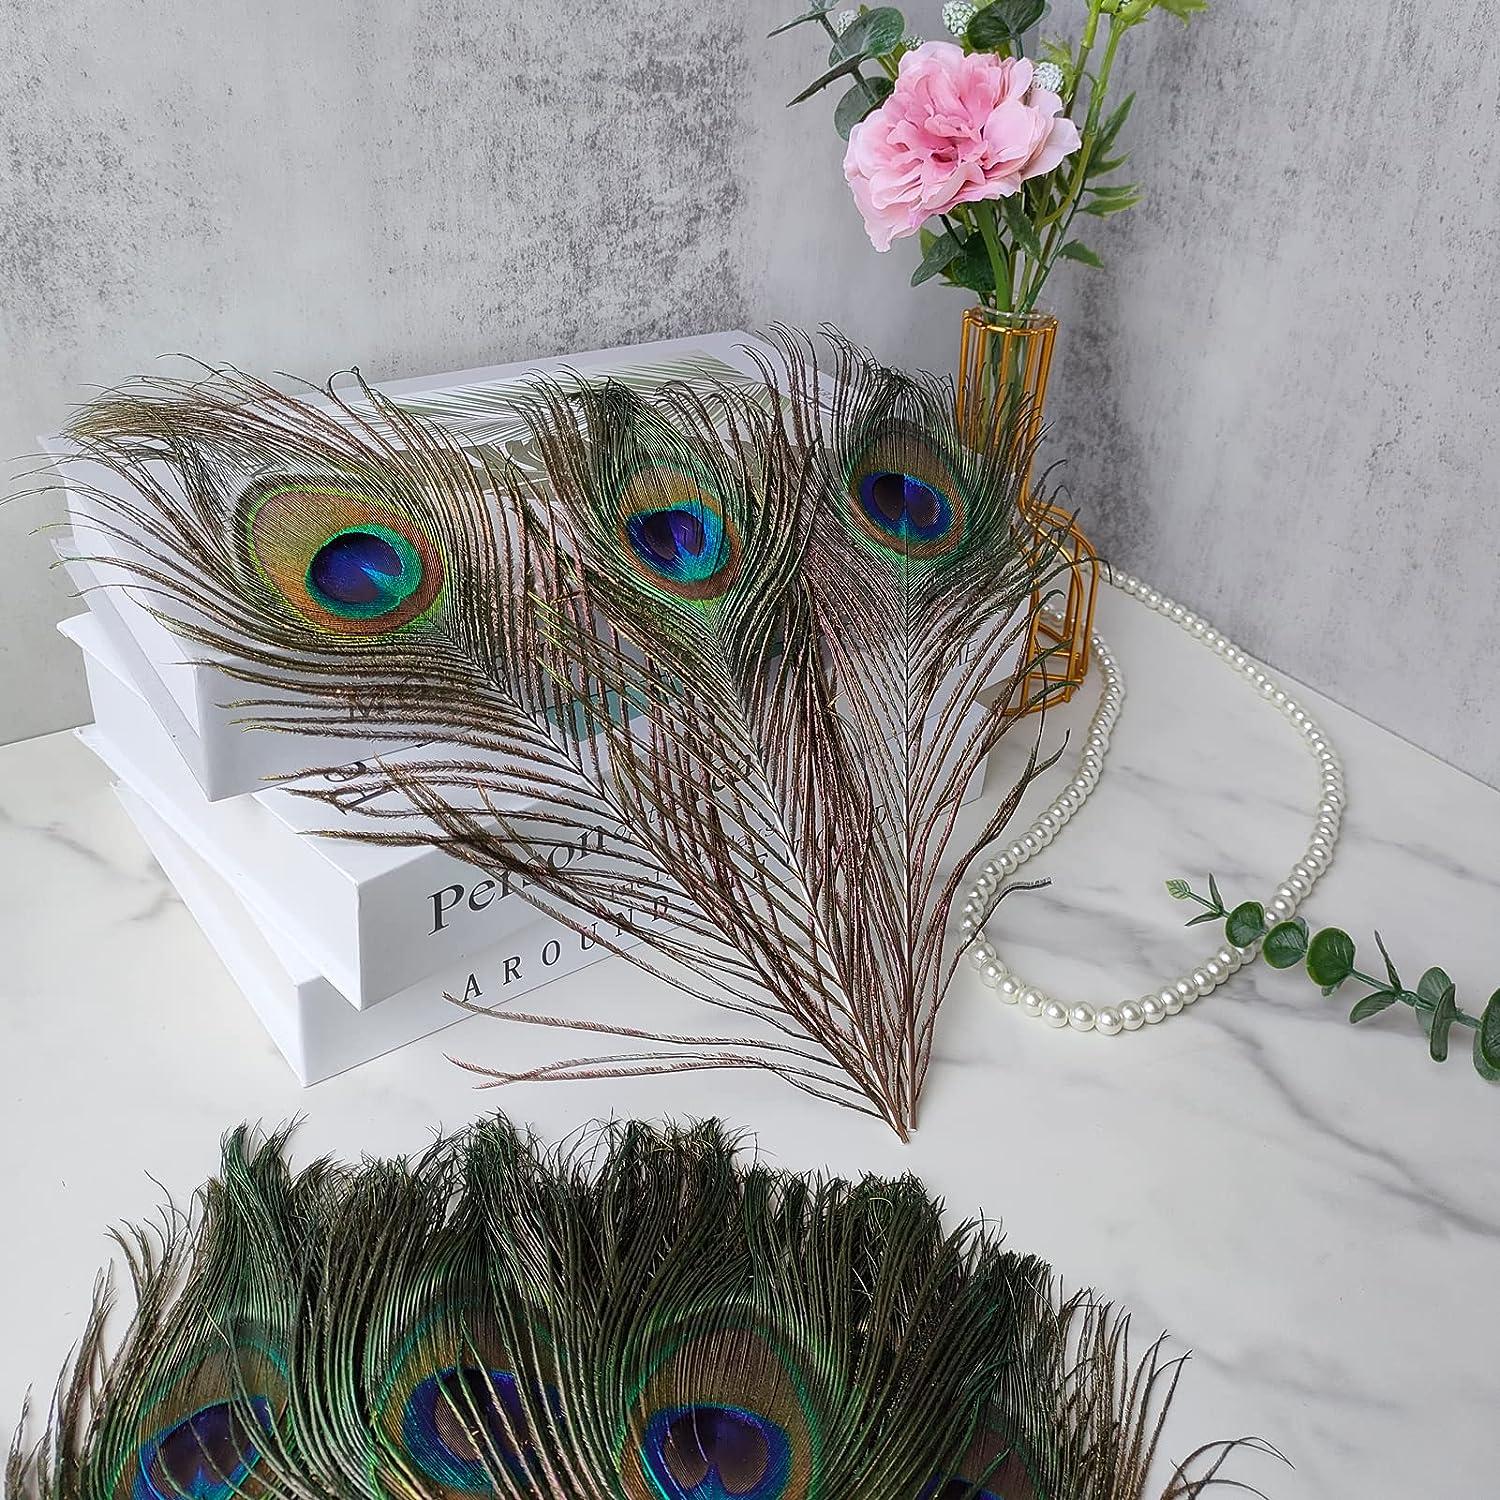 Wholesale 50pcs/lot Natural Peacock Feathers For Crafts 25-80cm natural  peacock feathers eyes for Wedding decoration plumes